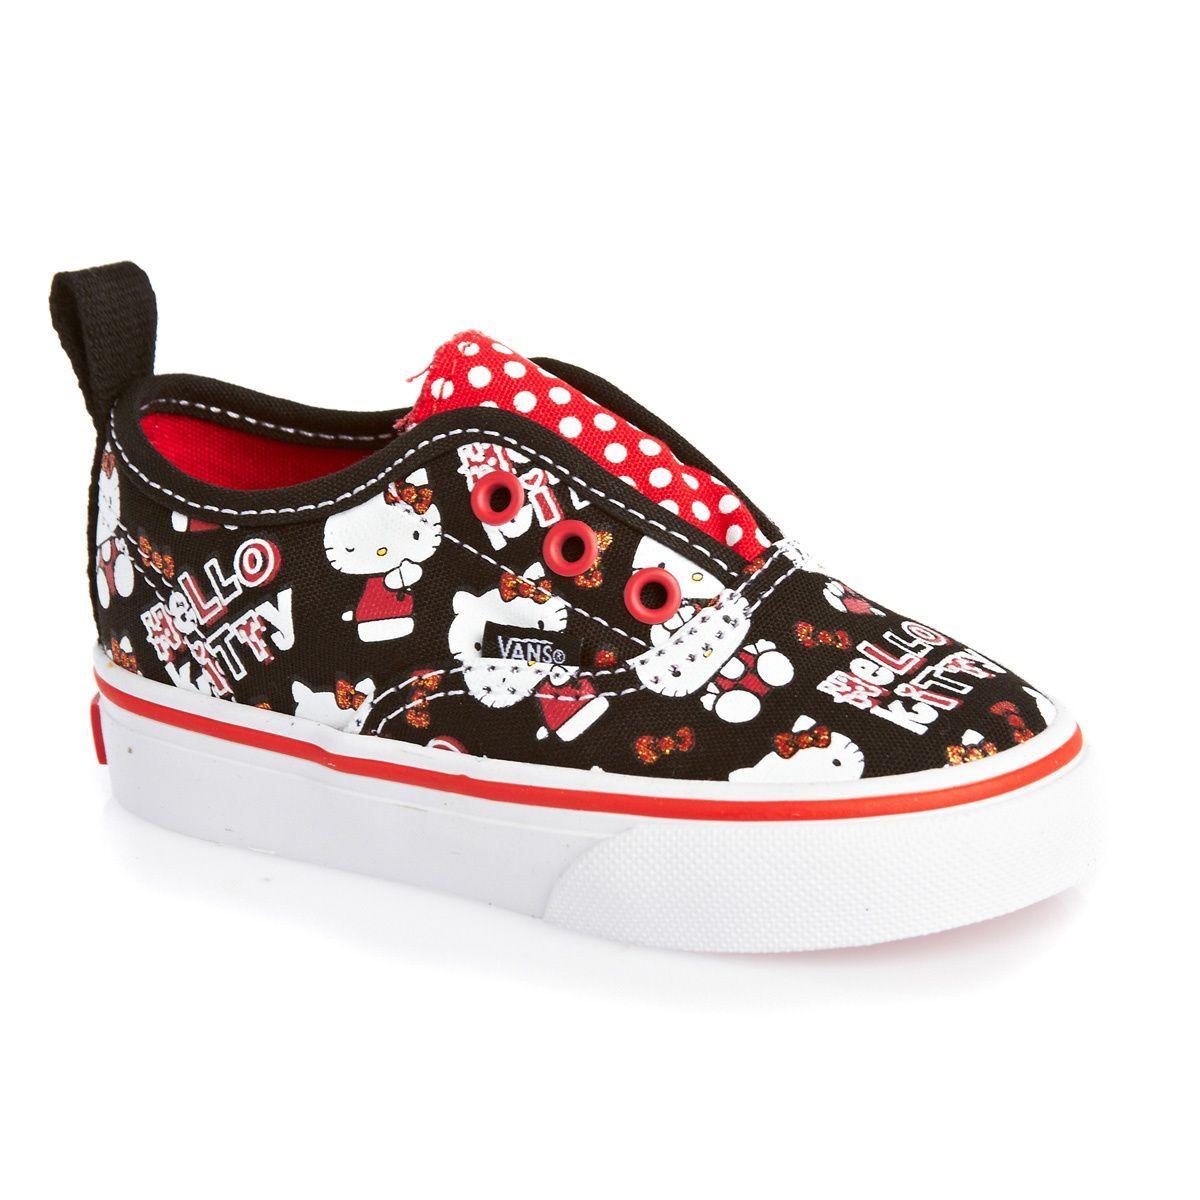 Hello Kitty Vans Logo - Vans Authentic V Shoes - Hello Kitty Black/High Risk Red | Free ...